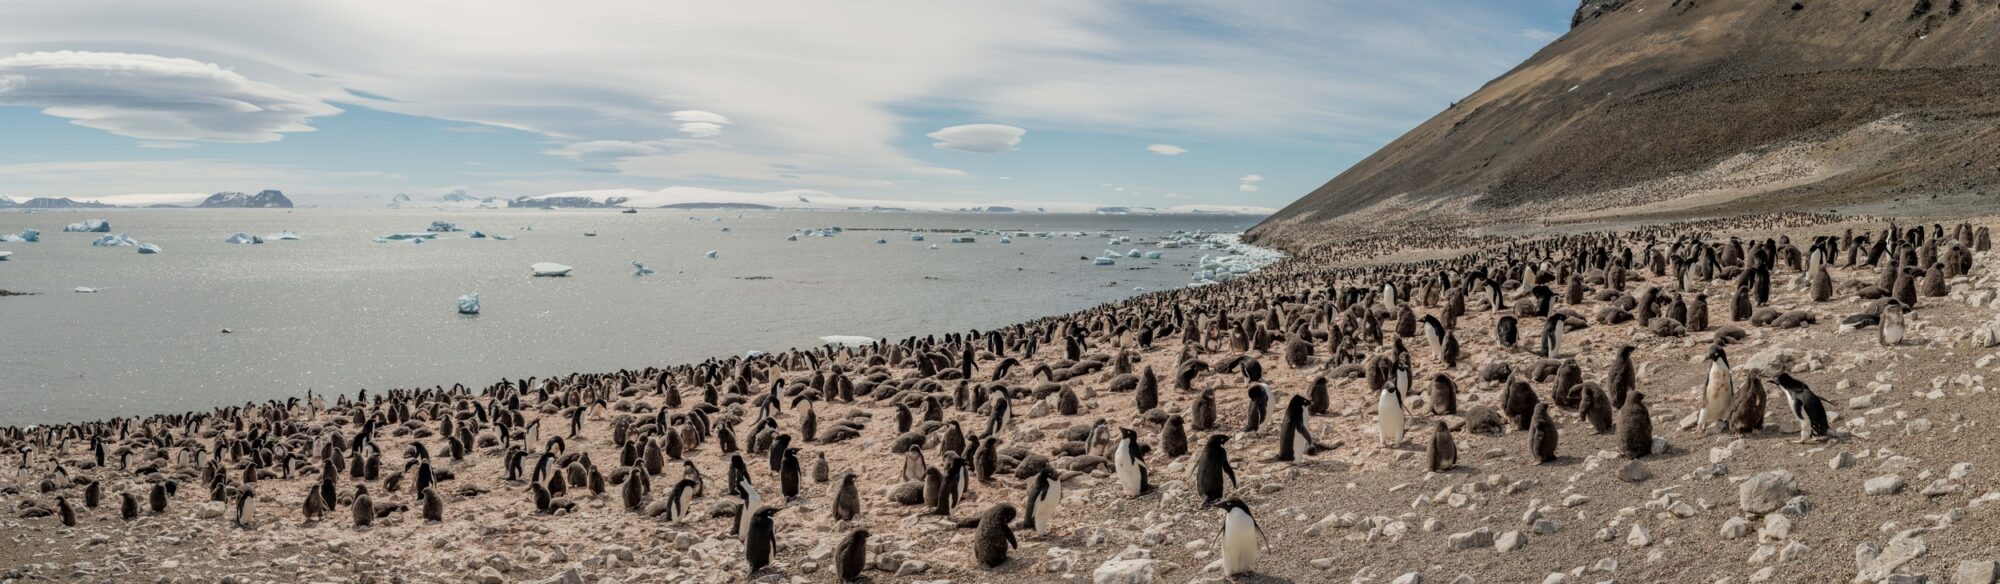 A penguin colony spreads across a beach towards a distant hill and the icy ocean on a clear day.